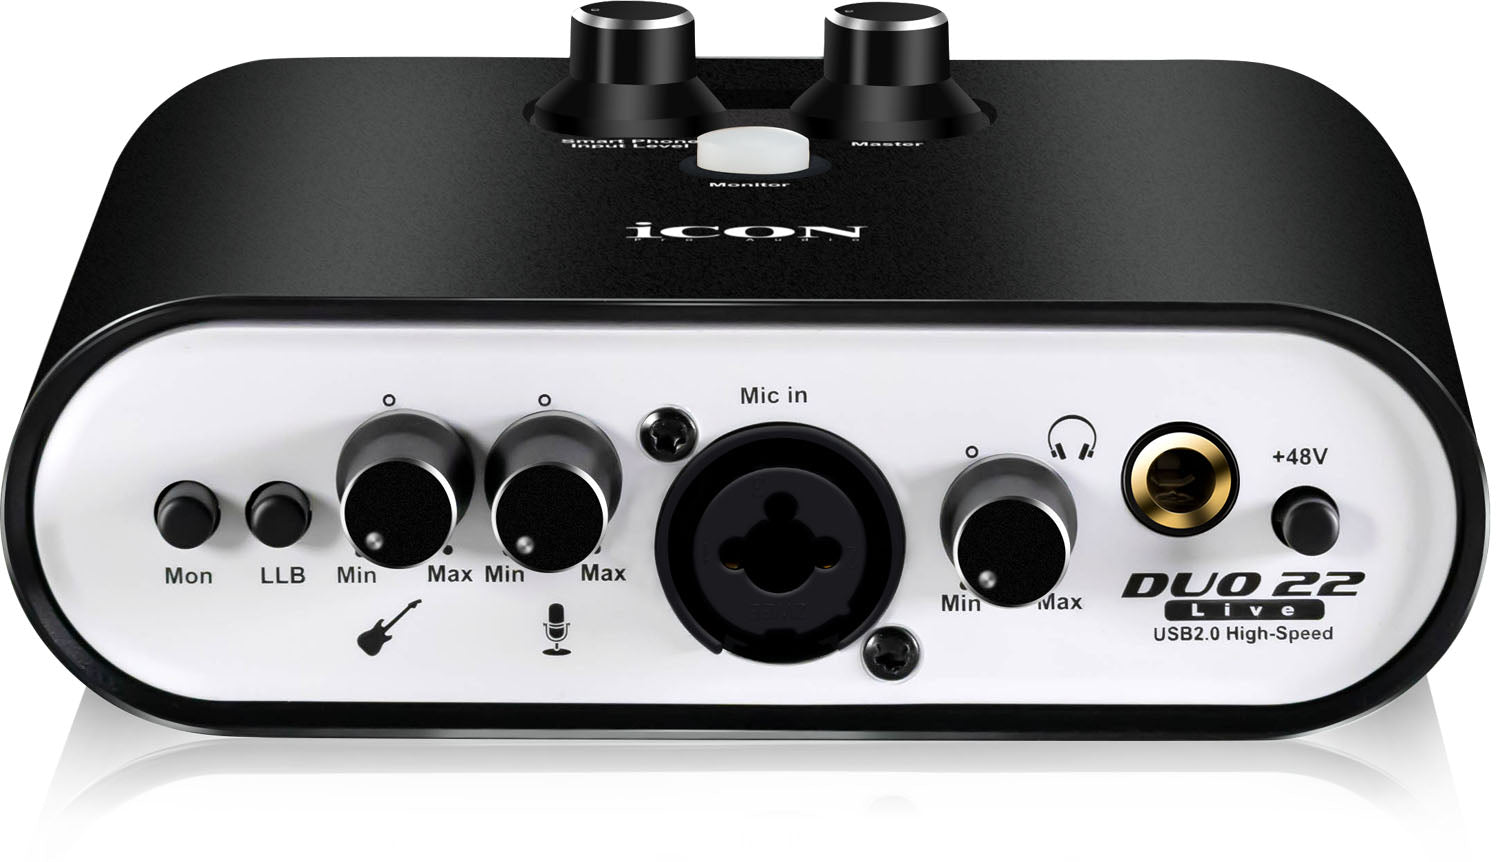 B-Stock: Icon Pro Audio Duo22 Live, Simultaneous Desktop and Mobile Connectivity Audio Streaming Interface - Hollywood DJ